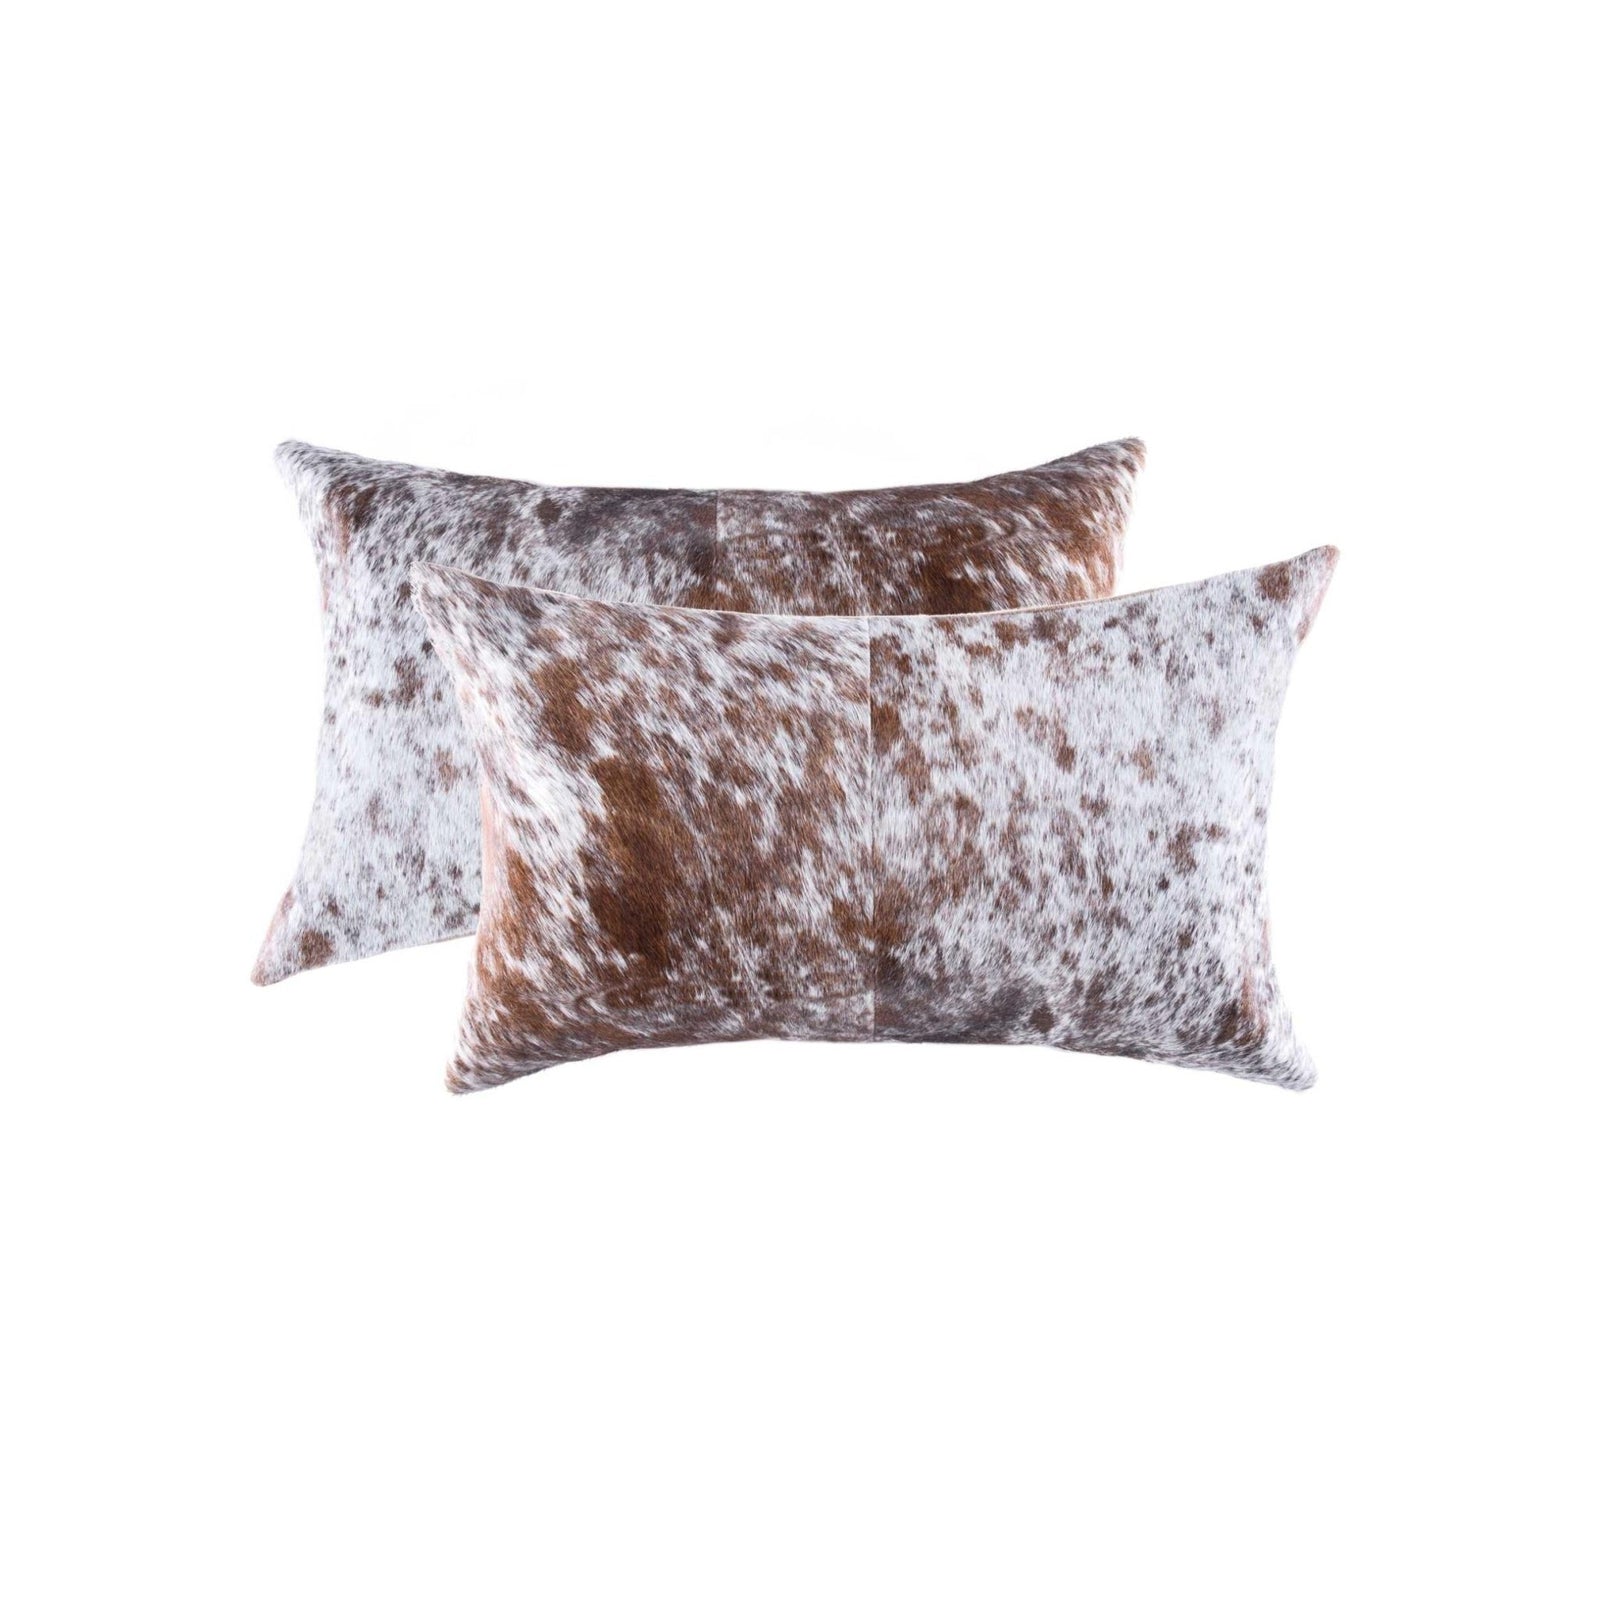 Salt And Pepper White And Brown Cowhide Pillow 2 Pack 12" x 20" x 5"